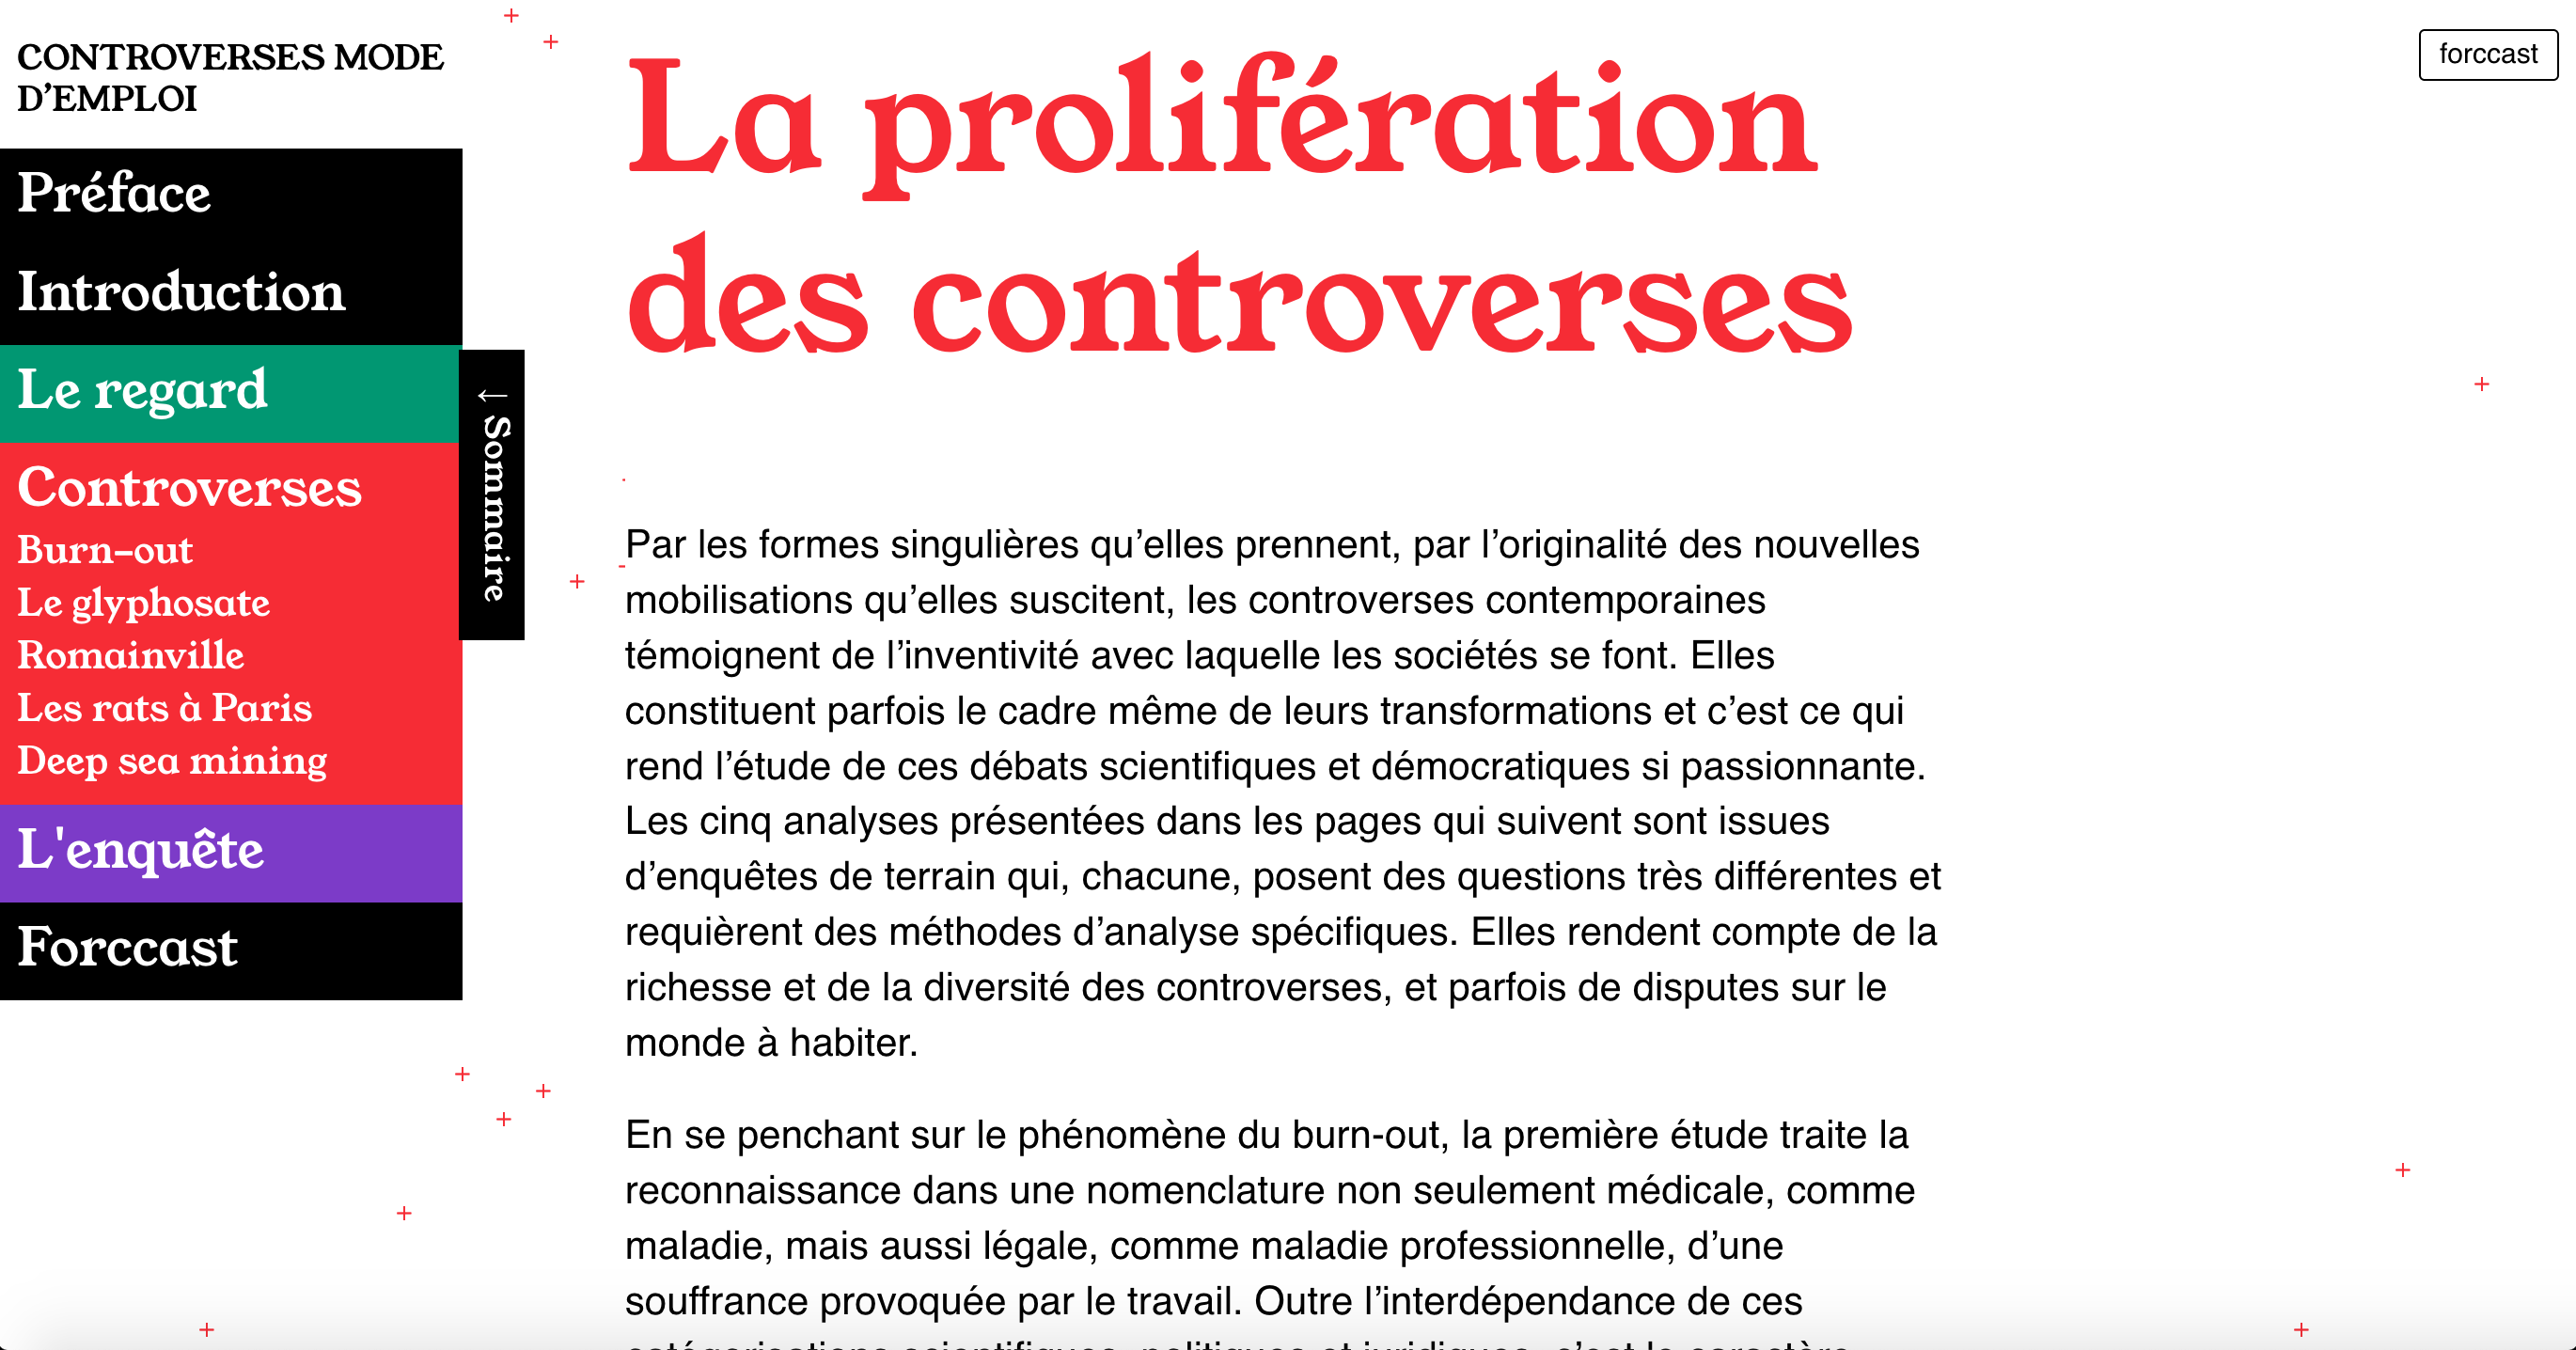 Web site of the book Controverses mode d’emploi (2021)